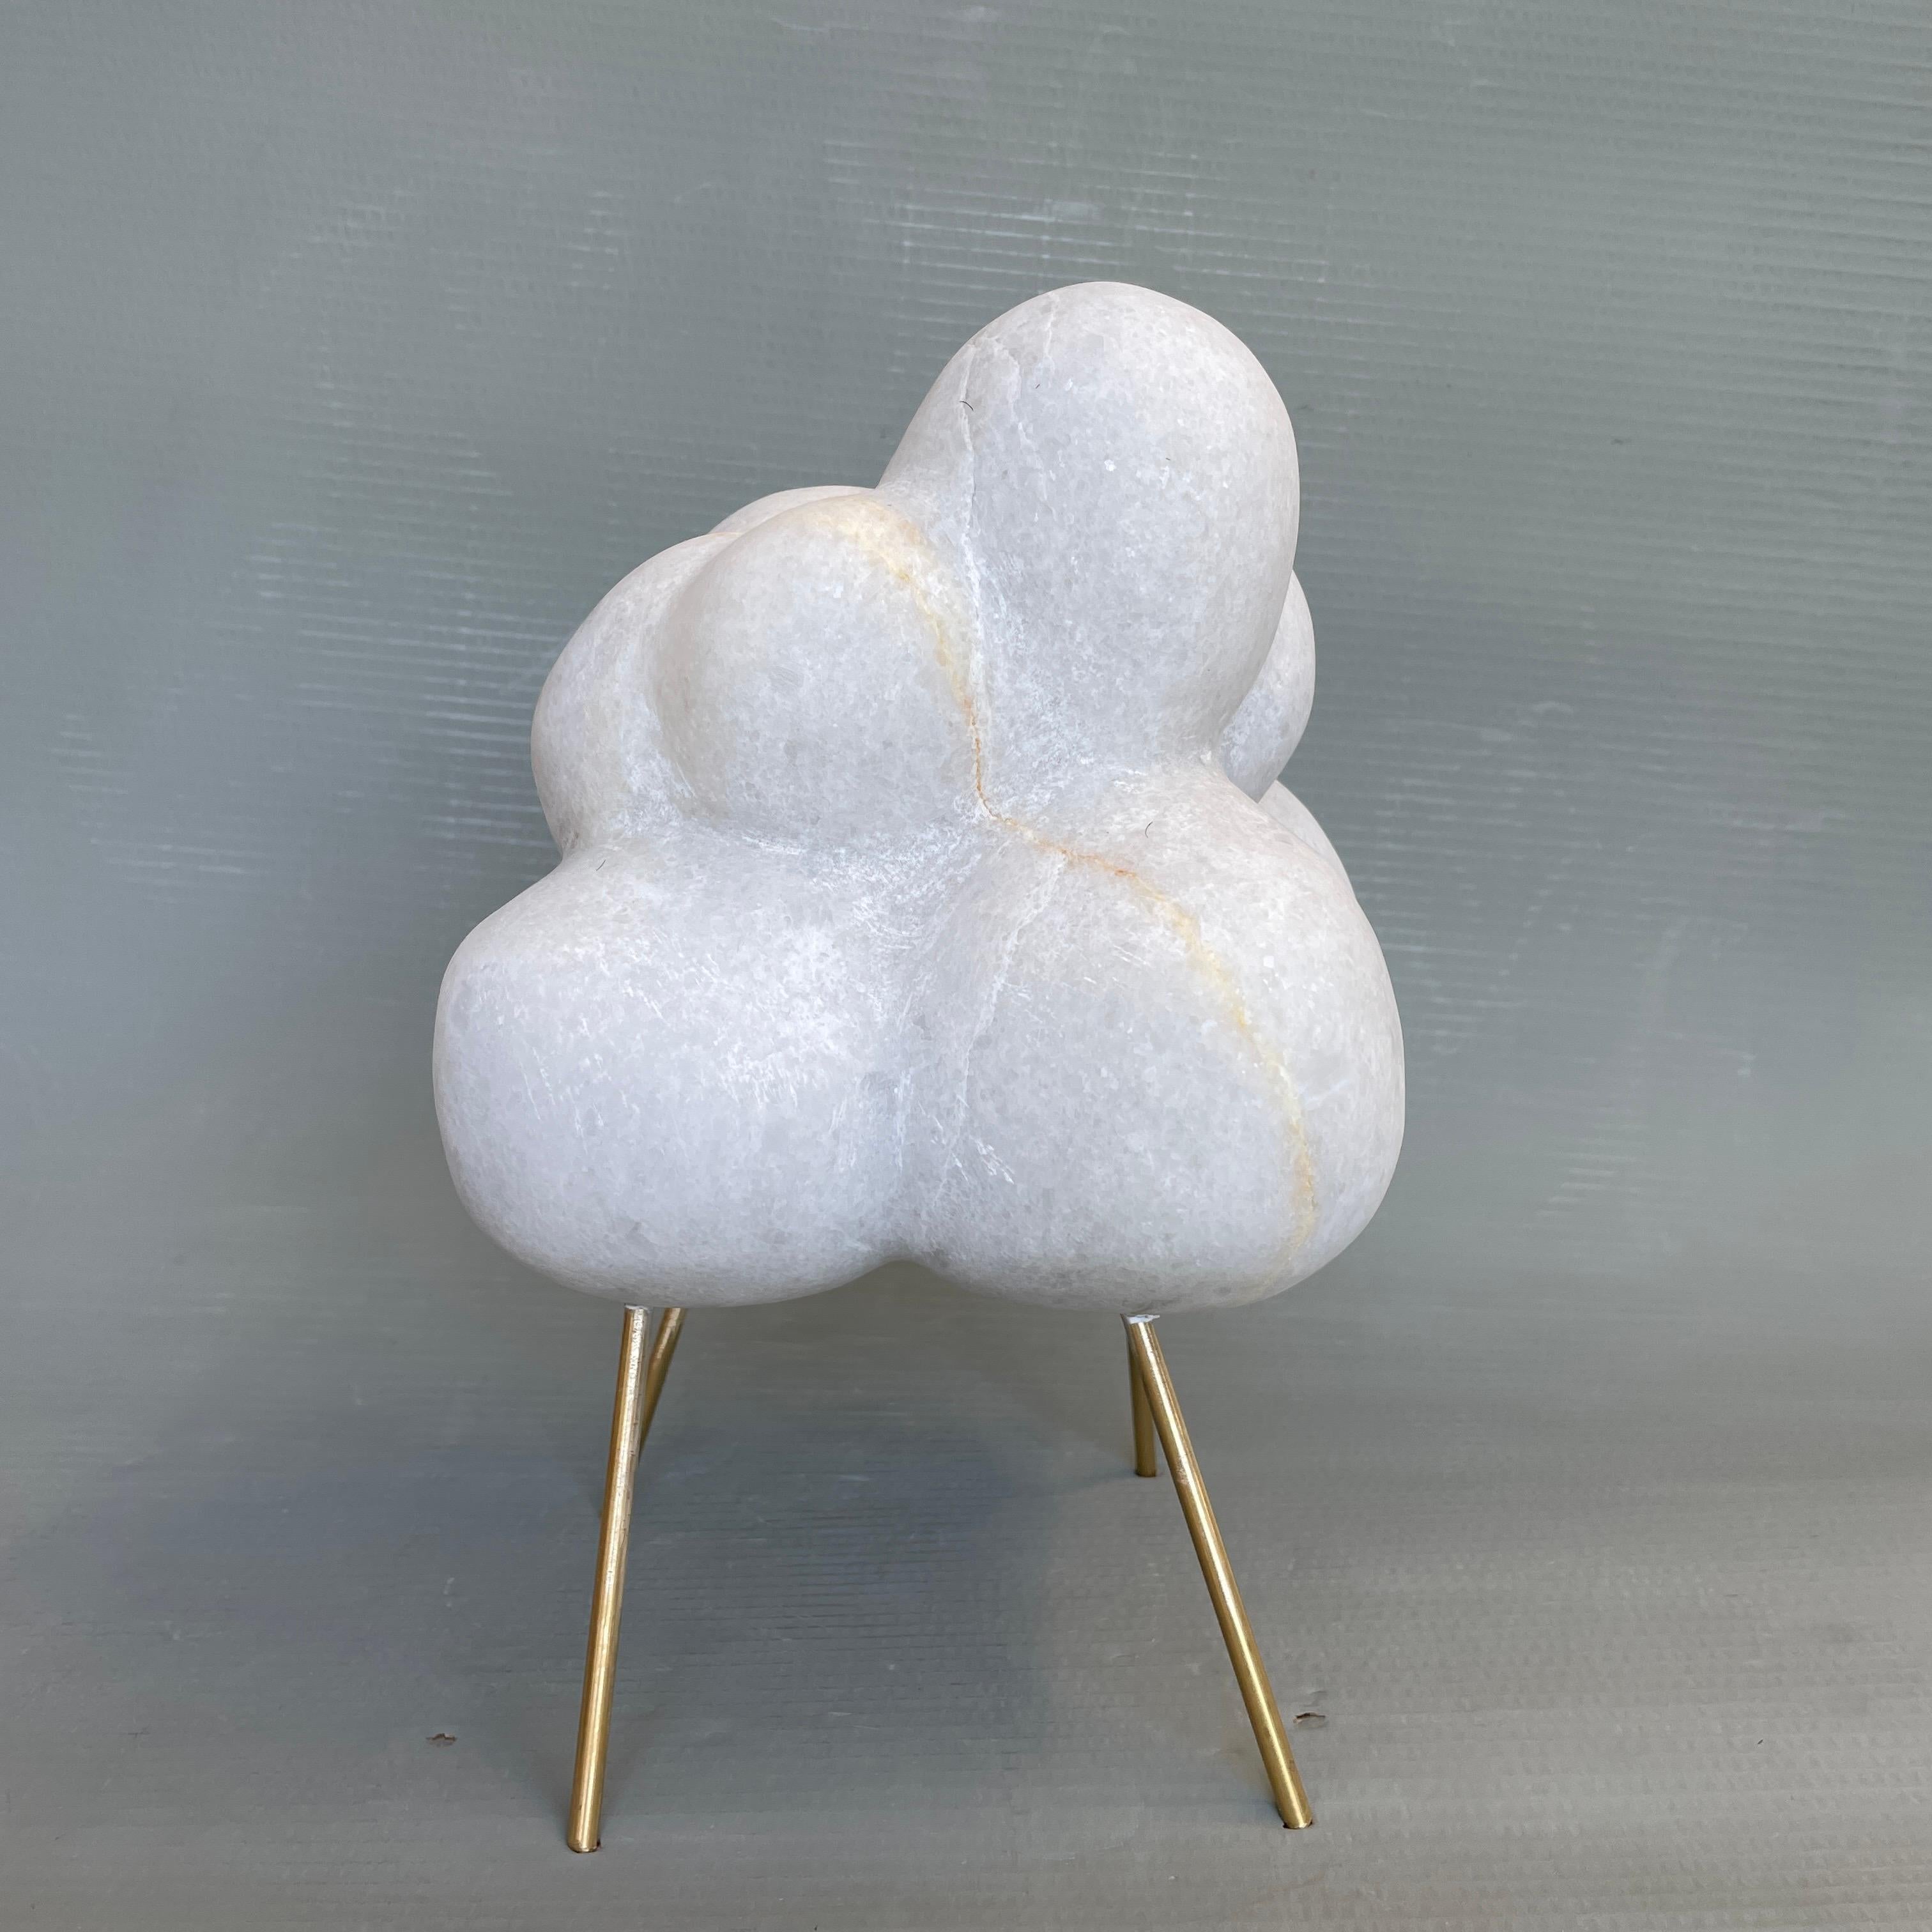 Cloud with bronze sticks marble sculpture by Tom Von Kaenel
Dimensions: D 25 x W 20 x H 30 cm
Materials: Marble

Tom von Kaenel, sculptor and painter, was born in Switzerland in 1961. Already in his early childhood he was deeply devoted to art.